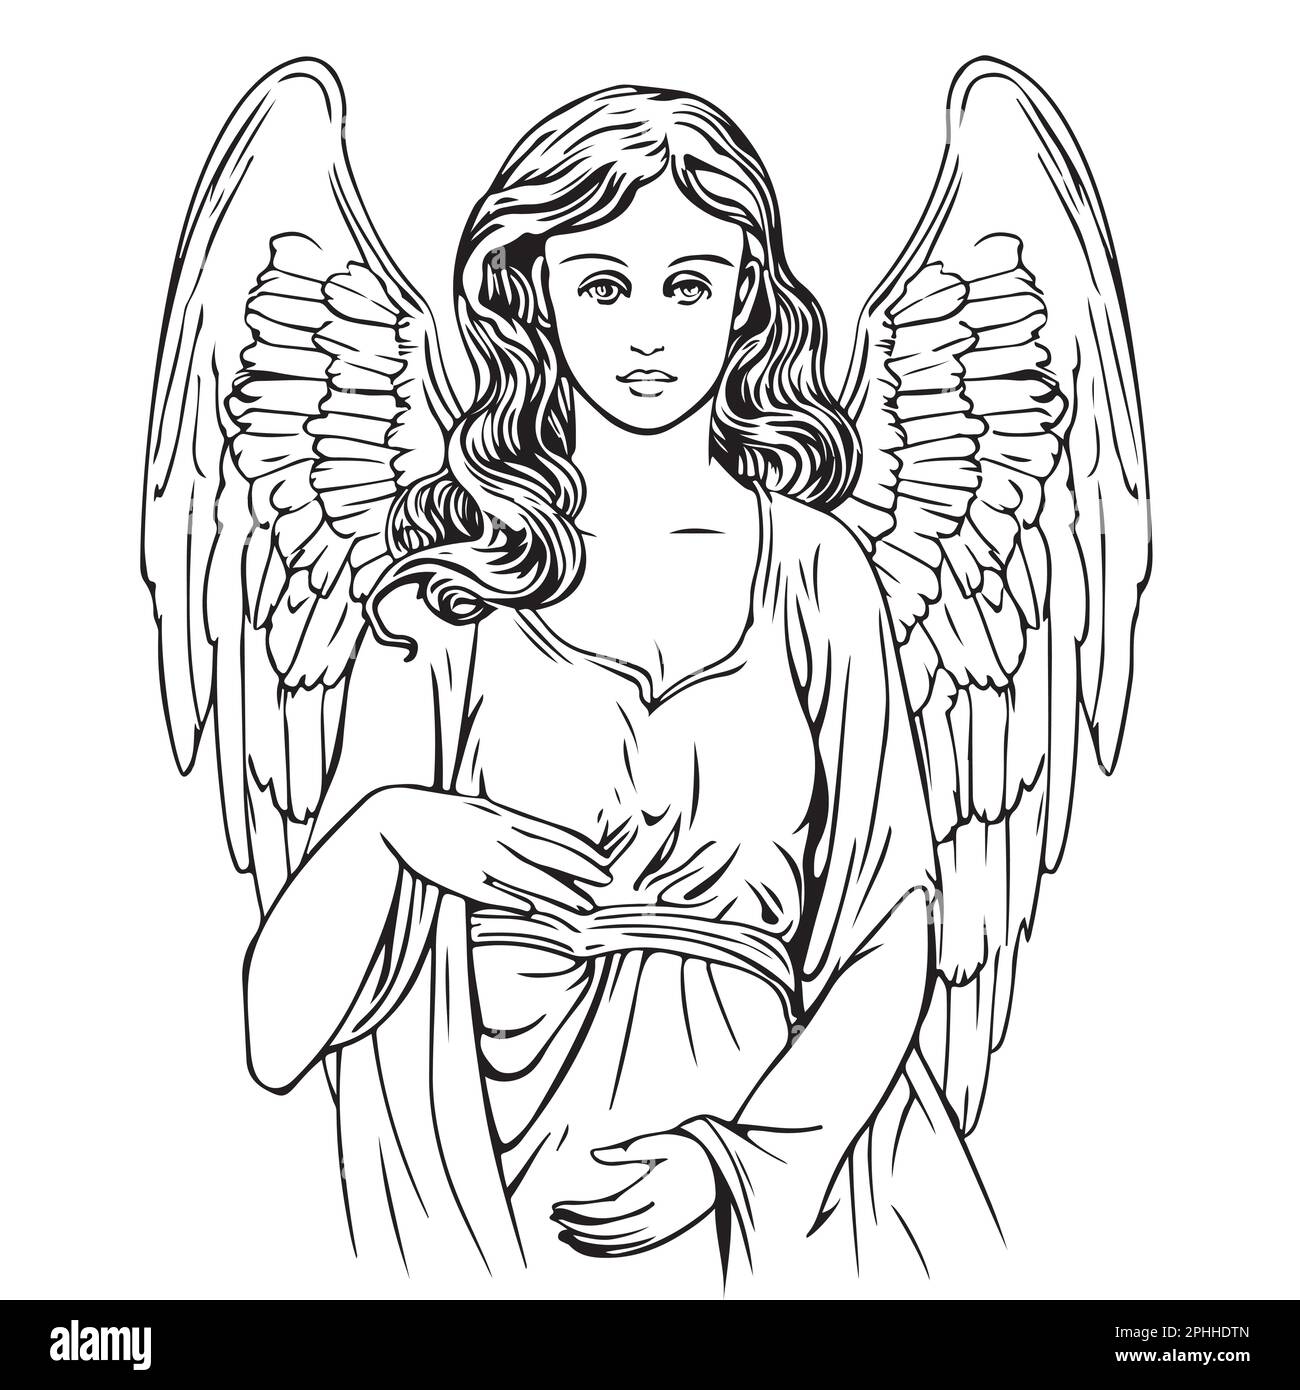 Angel girl with wings sketch hand drawn illustration Stock Vector